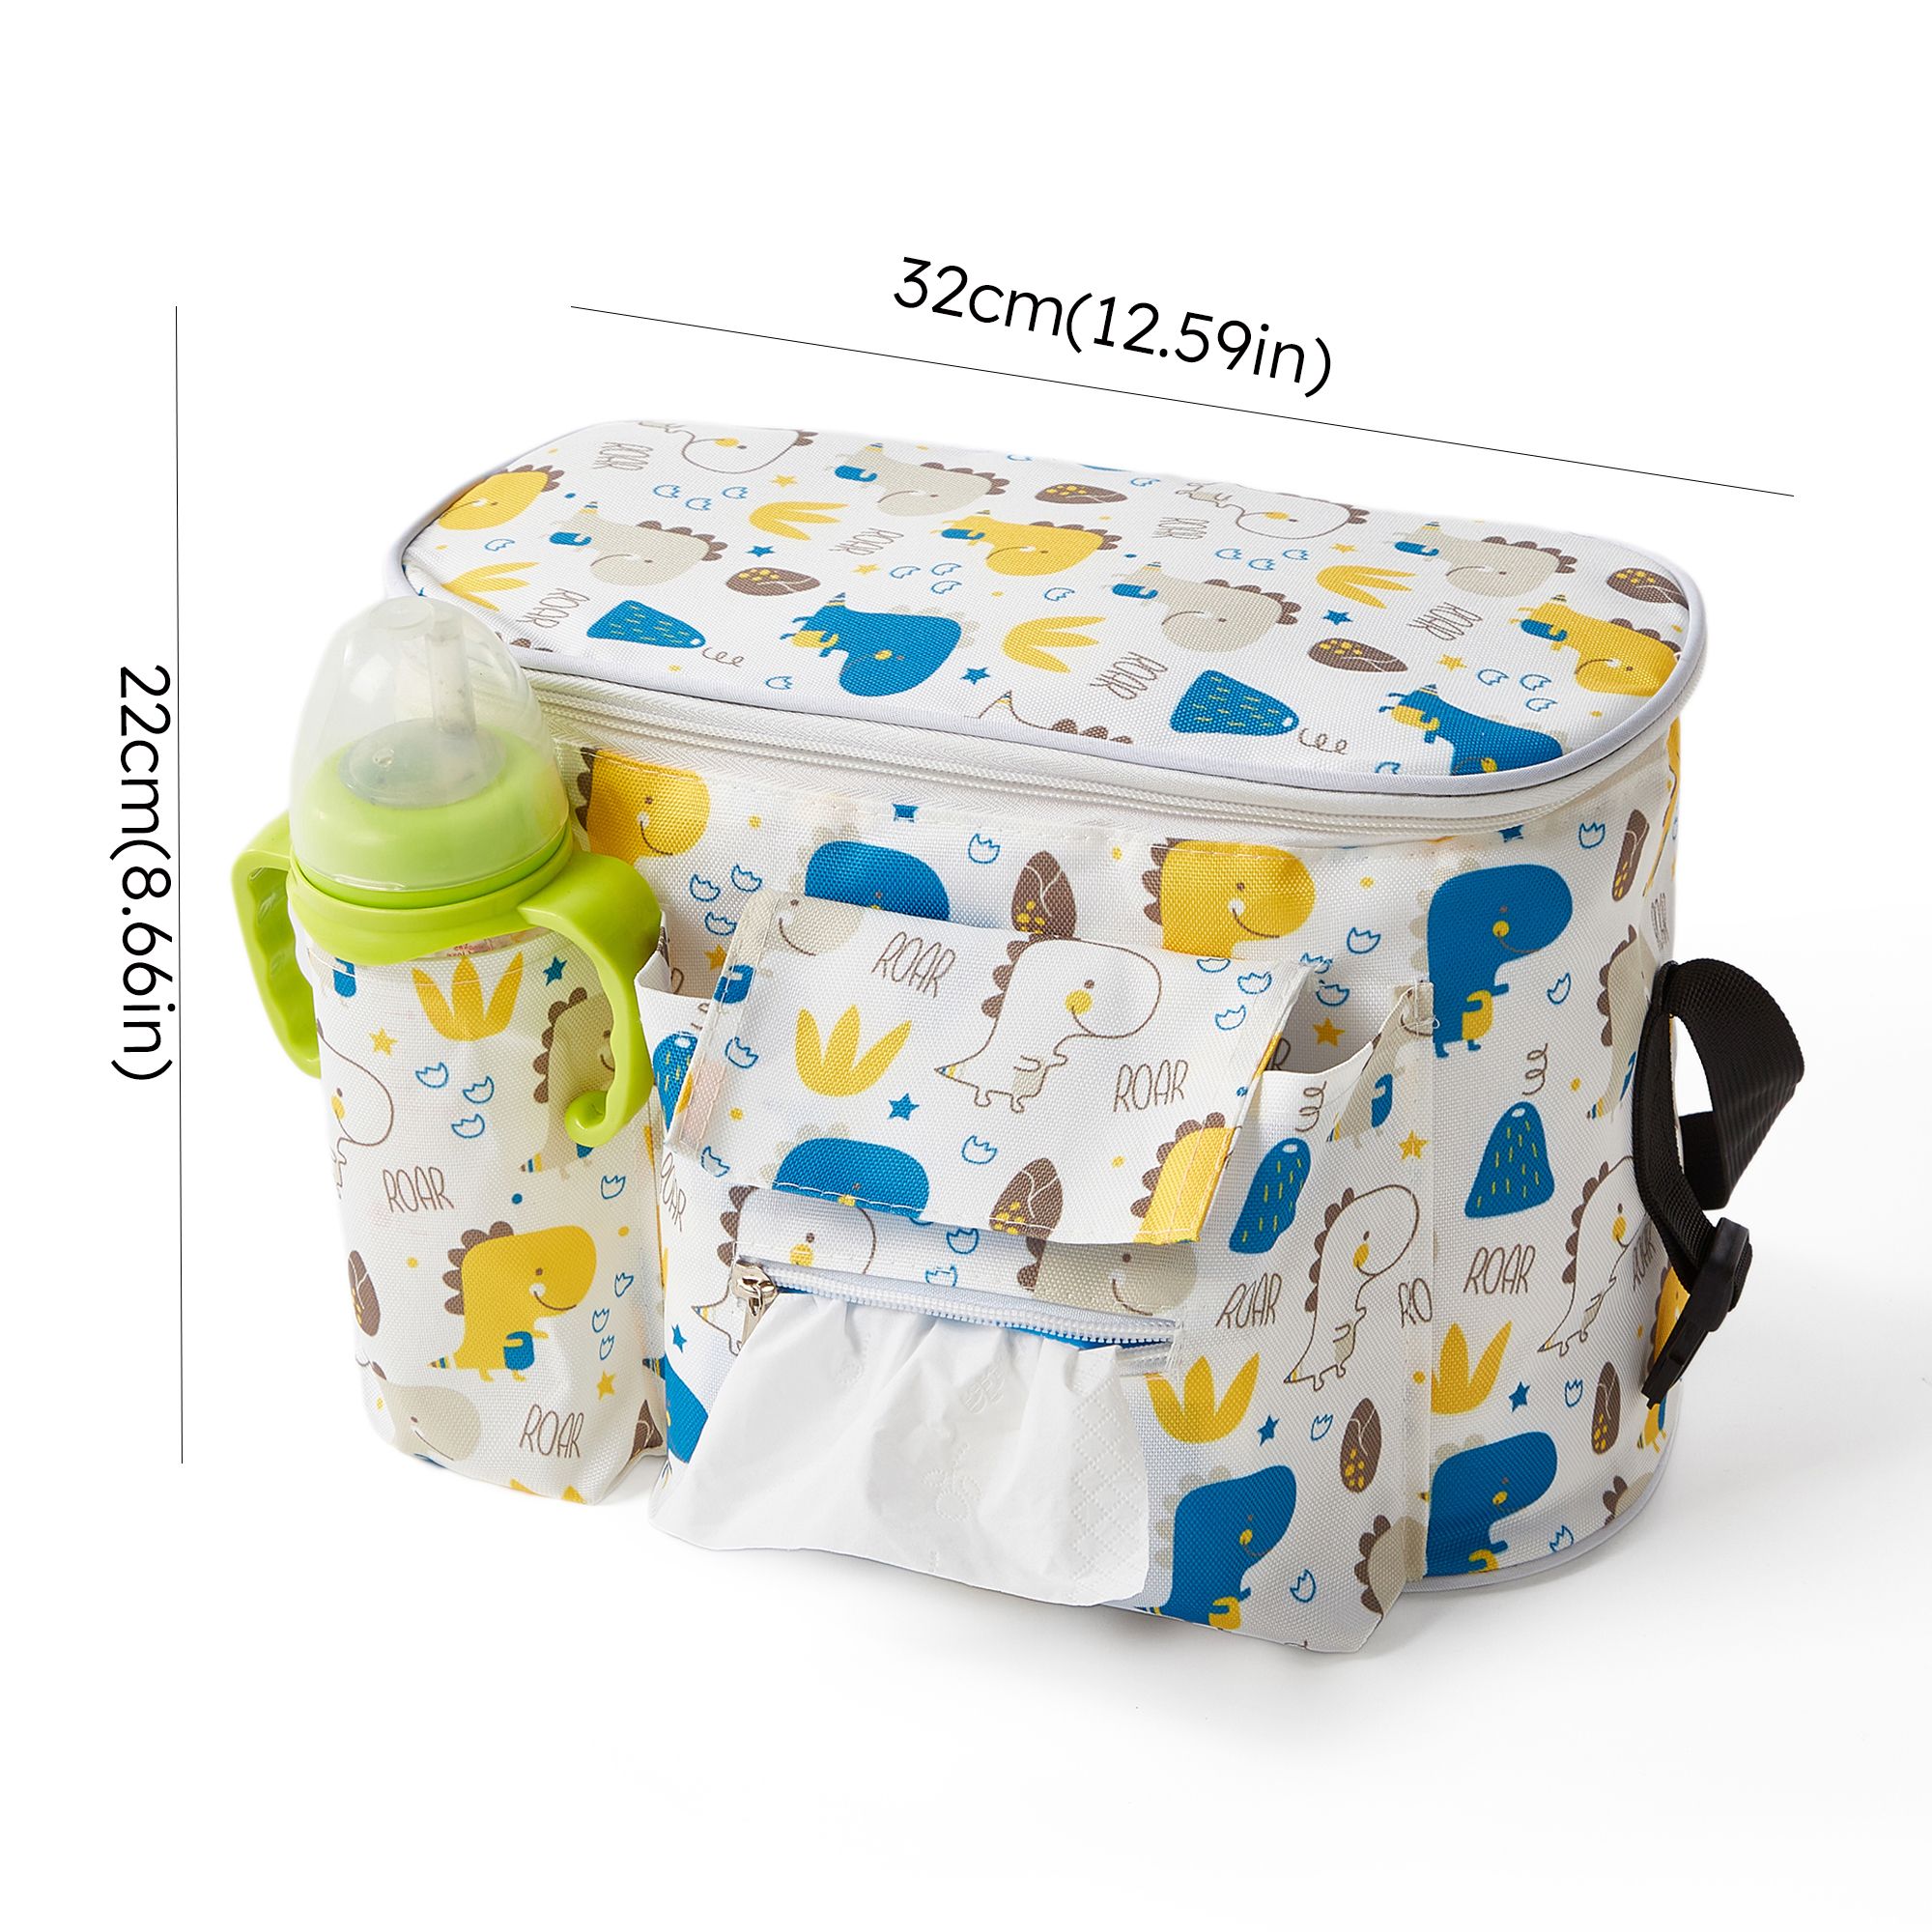 Baby Stroller Organizer Bag: Multifunctional Storage Solution For On-the-Go Moms